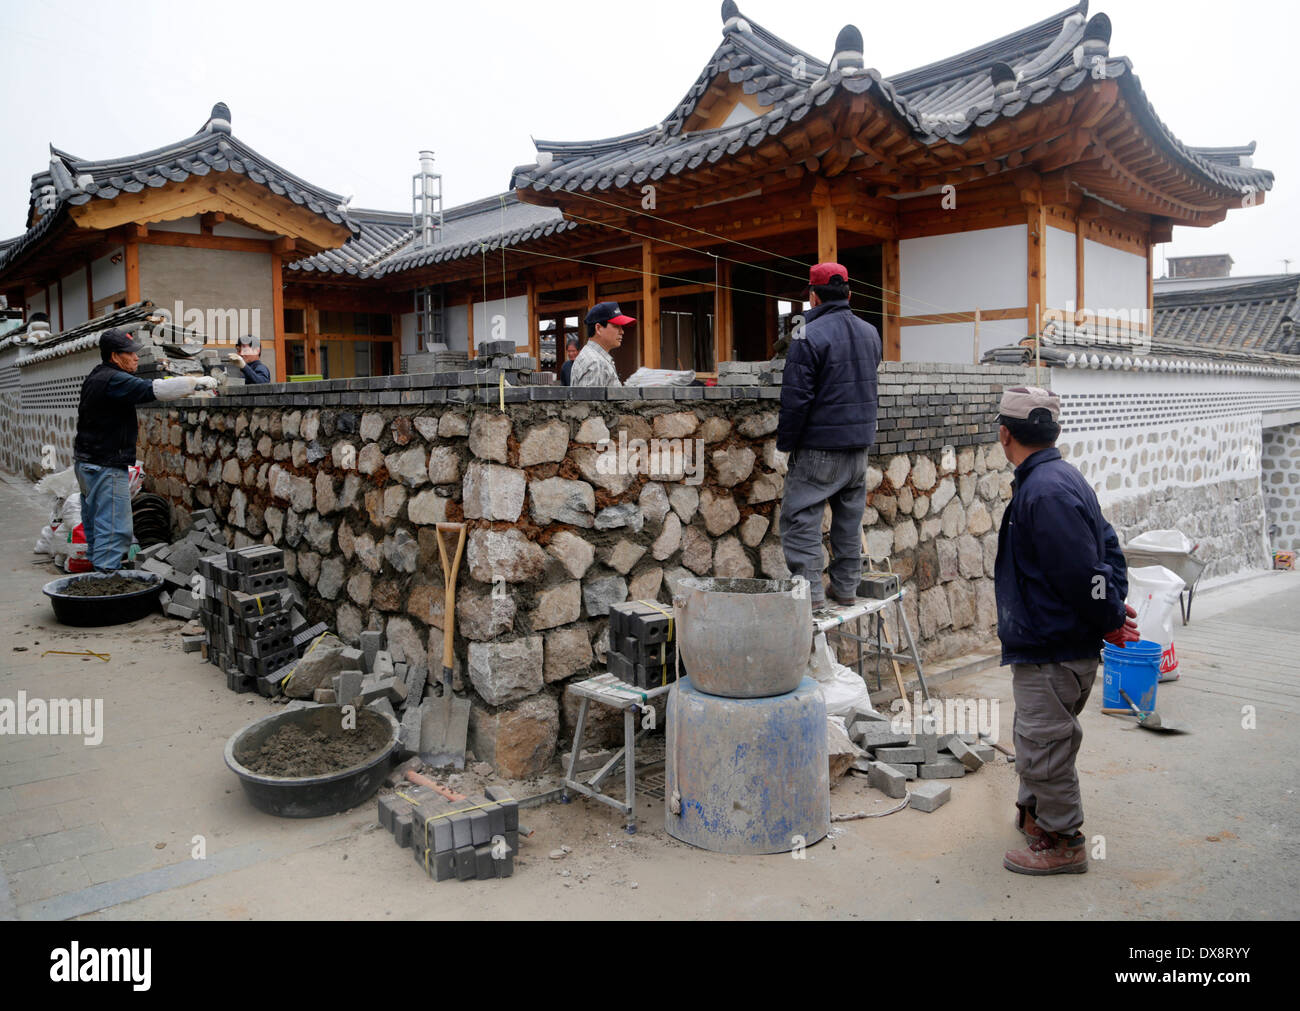 Workers work to build a house at a Korean traditional Hanok village in Seoul, South Korea Stock Photo